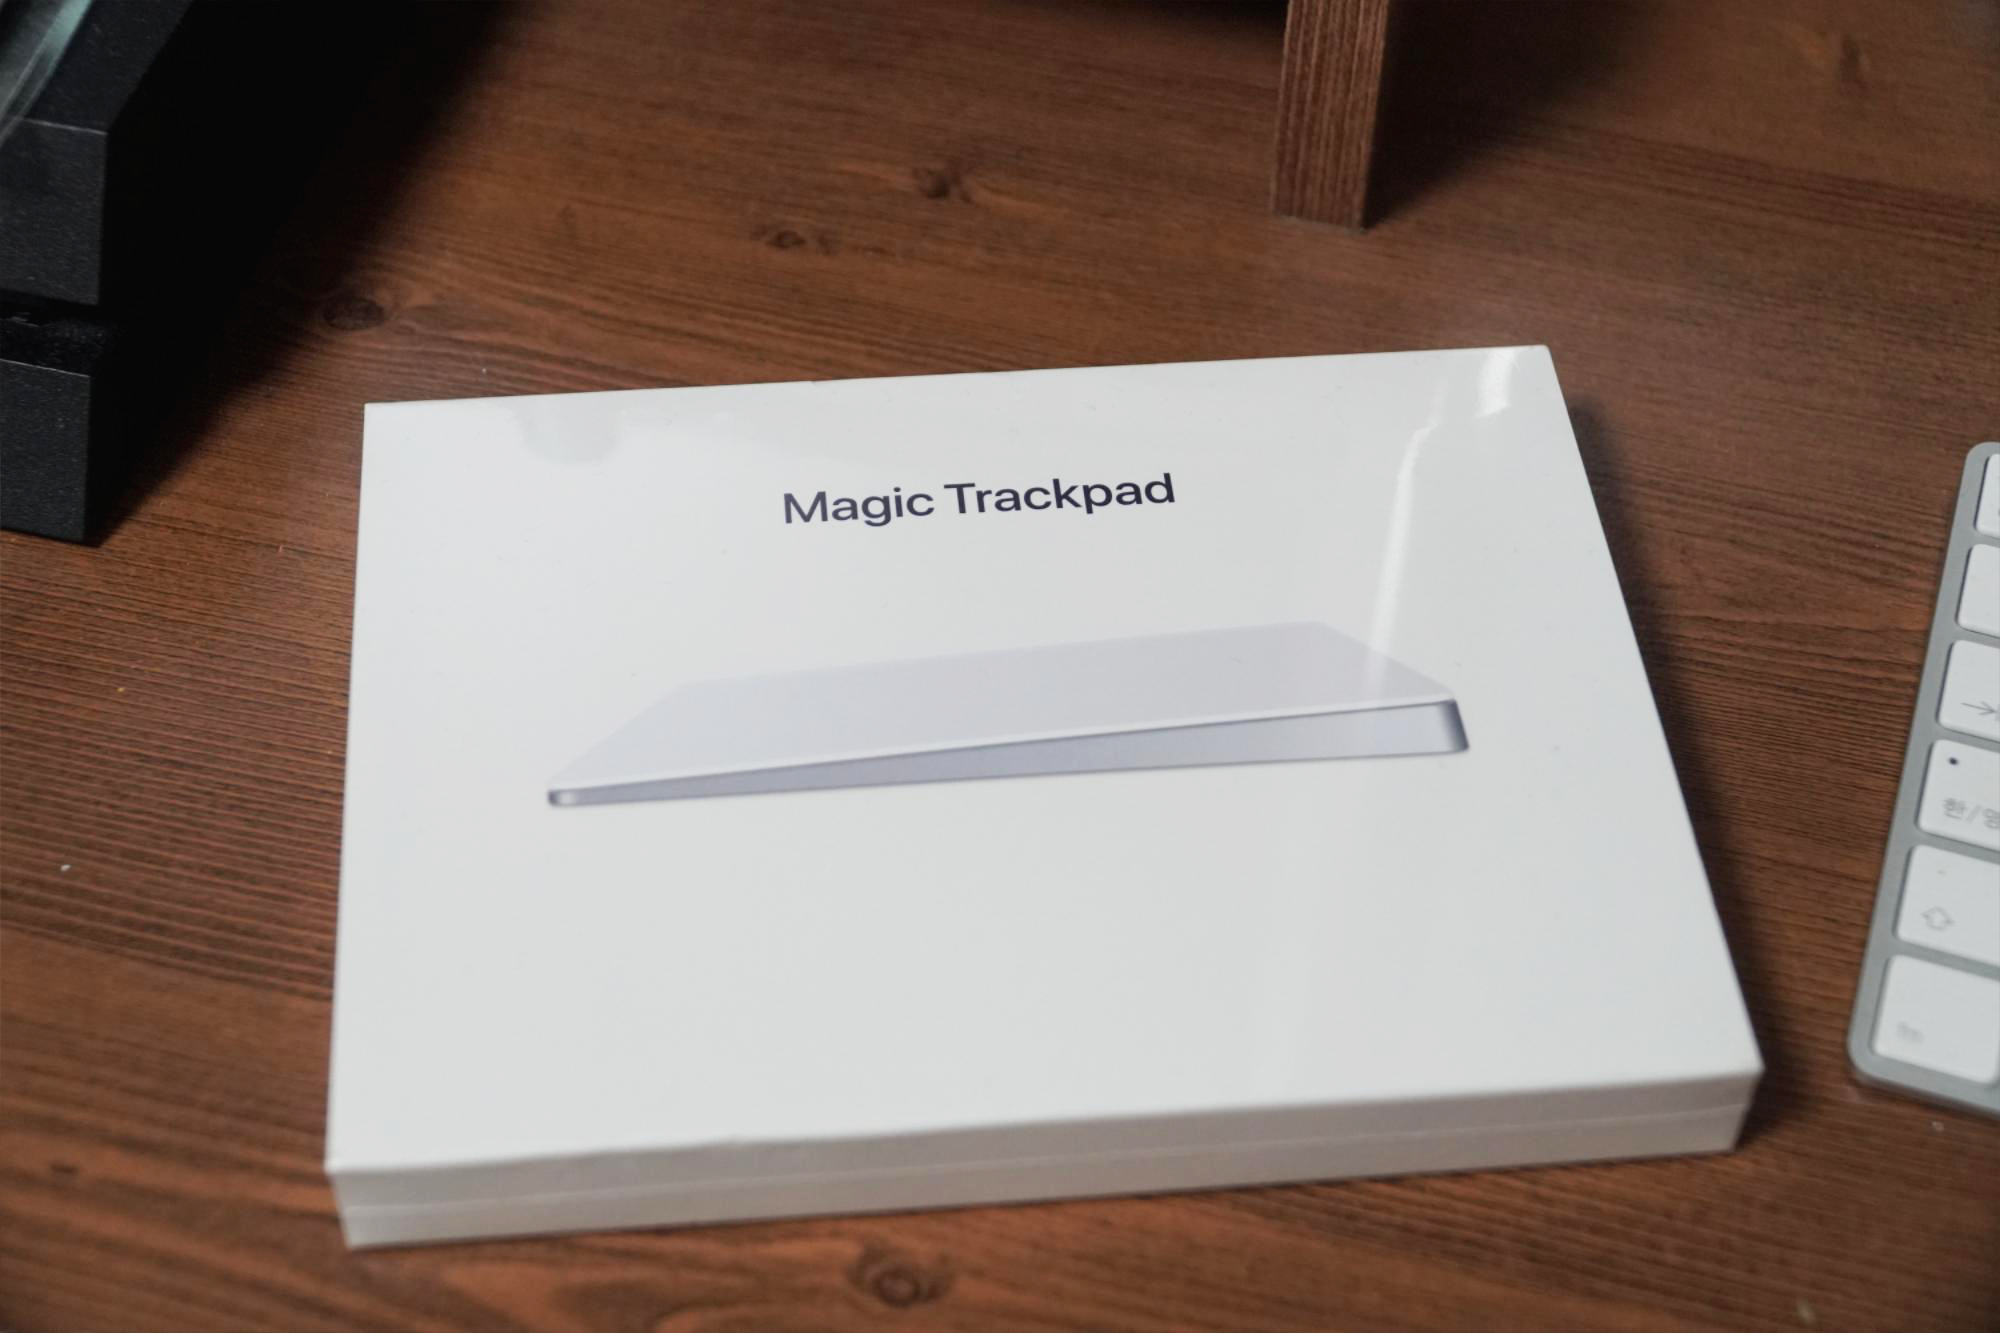 trackpad magic 2 connection lost